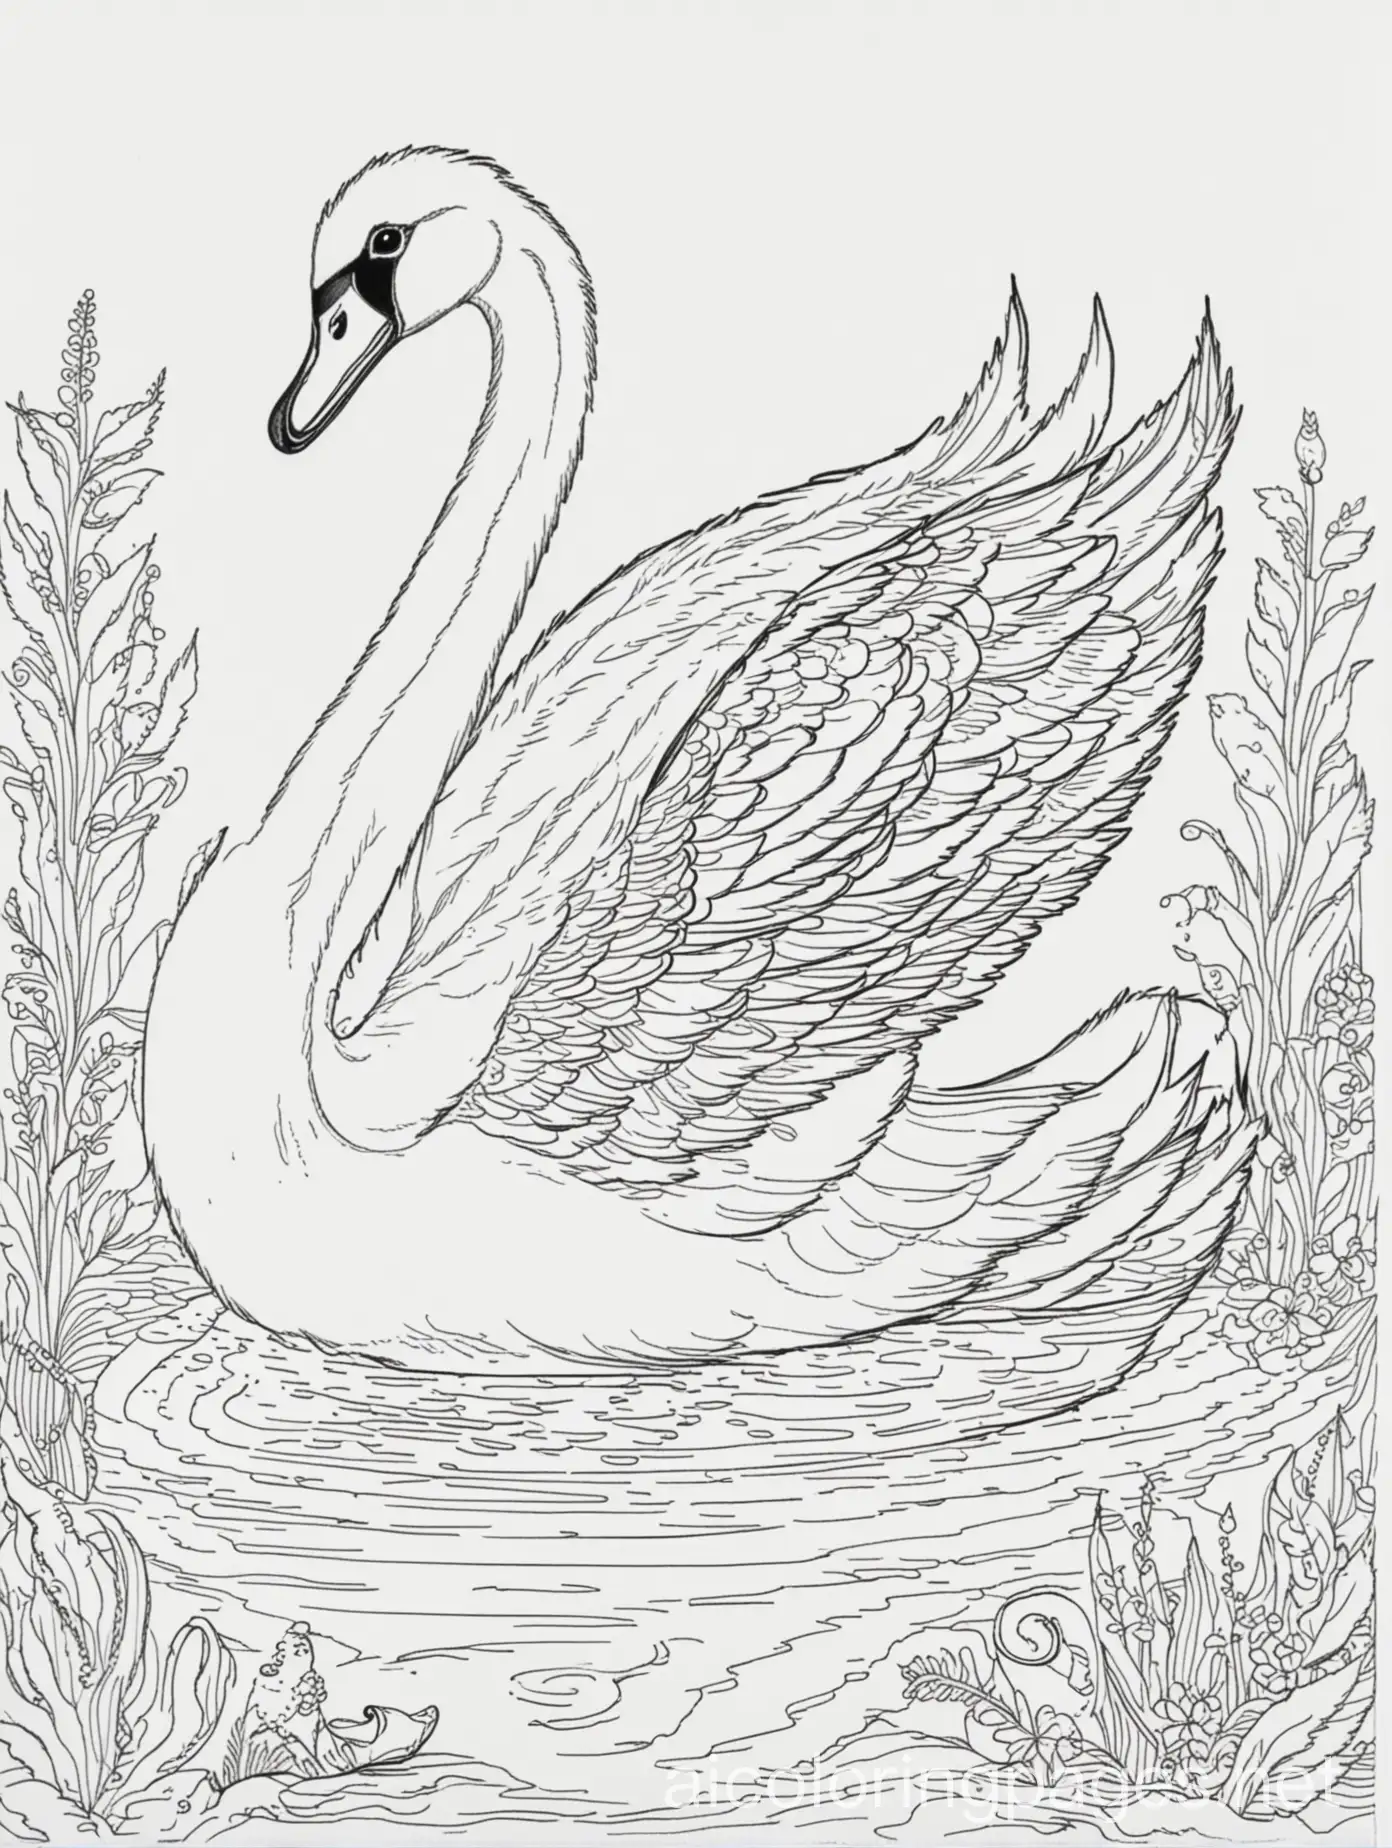 swan, Coloring Page, black and white, line art, white background, Simplicity, Ample White Space, Coloring Page, black and white, line art, white background, Simplicity, Ample White Space. The background of the coloring page is plain white to make it easy for young children to color within the lines. The outlines of all the subjects are easy to distinguish, making it simple for kids to color without too much difficulty